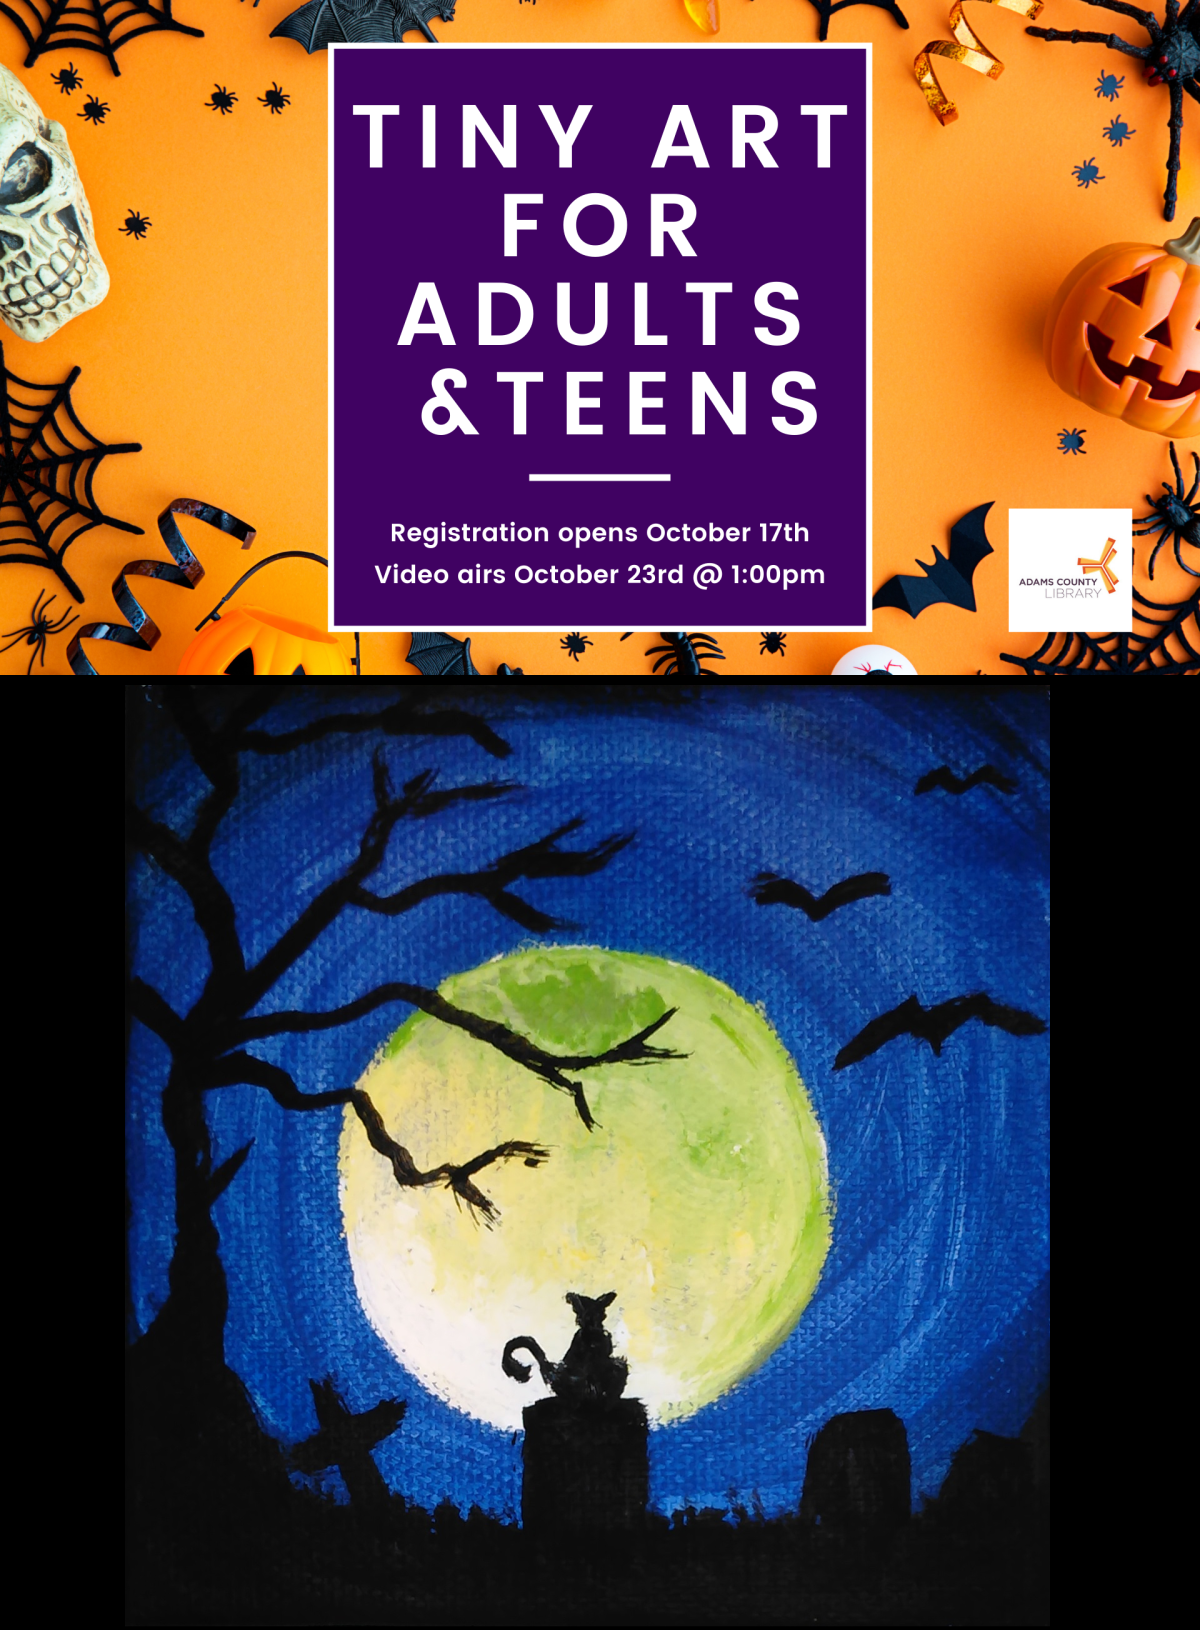 Tiny Art for Teens and Adults. Registration opens October 17th. Video airs October 23rd at 1pm.